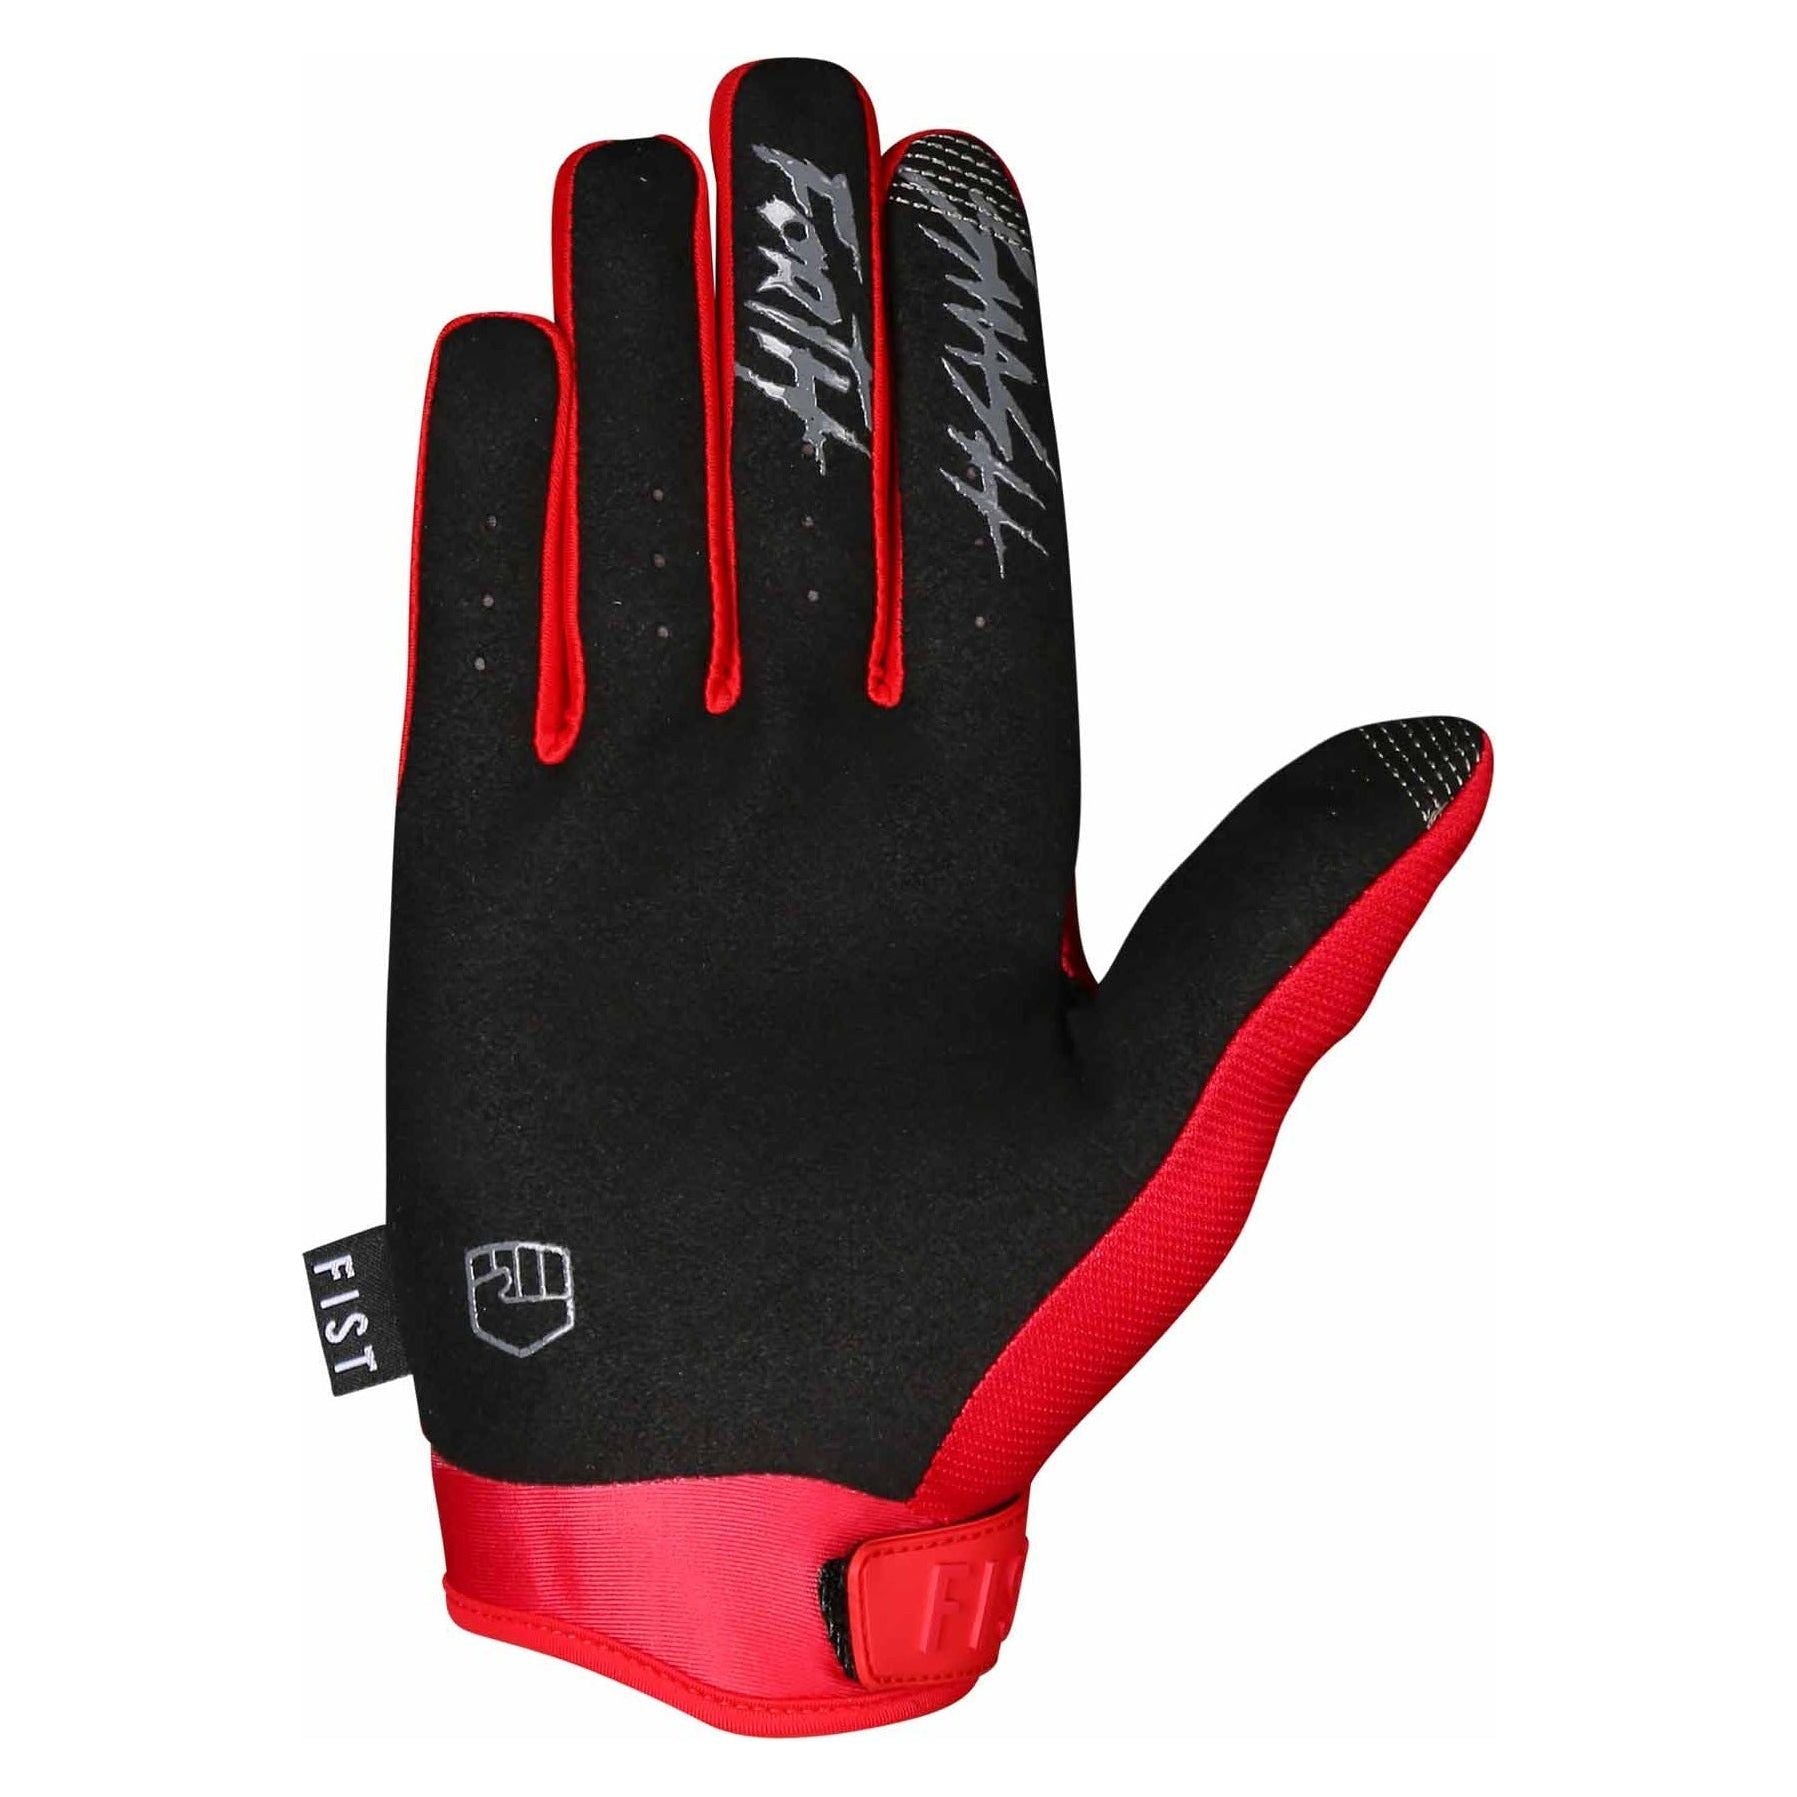 Fist Handwear Stocker Youth Strapped Glove - Youth S - Red Stocker - Image 2